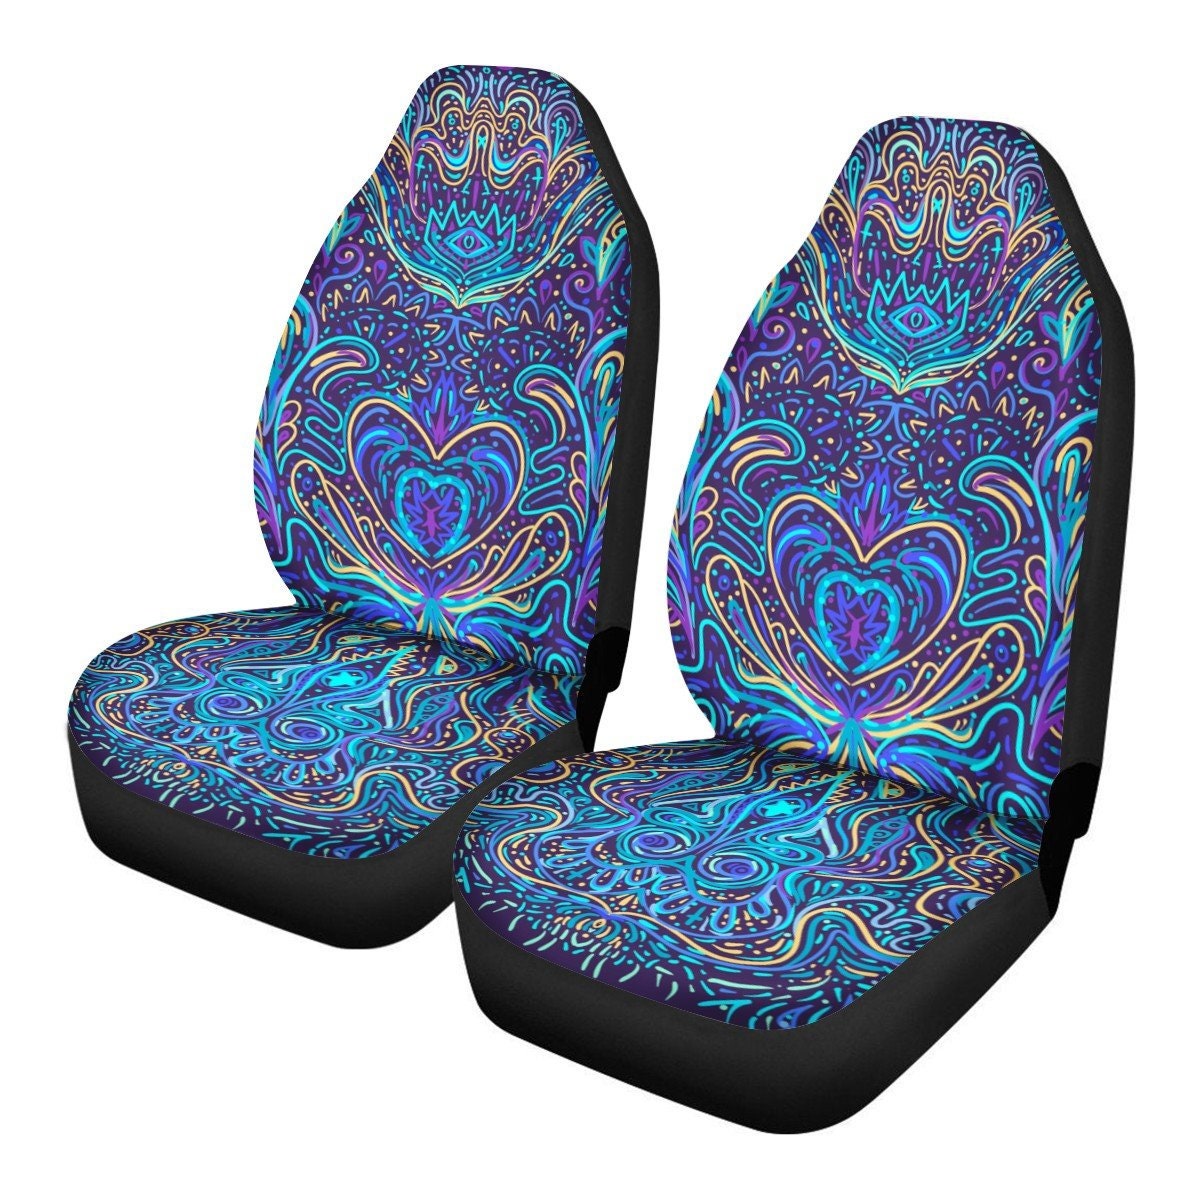 Psychedelic Blue Car Seat Covers Colorful Seat Covers, Vibrant